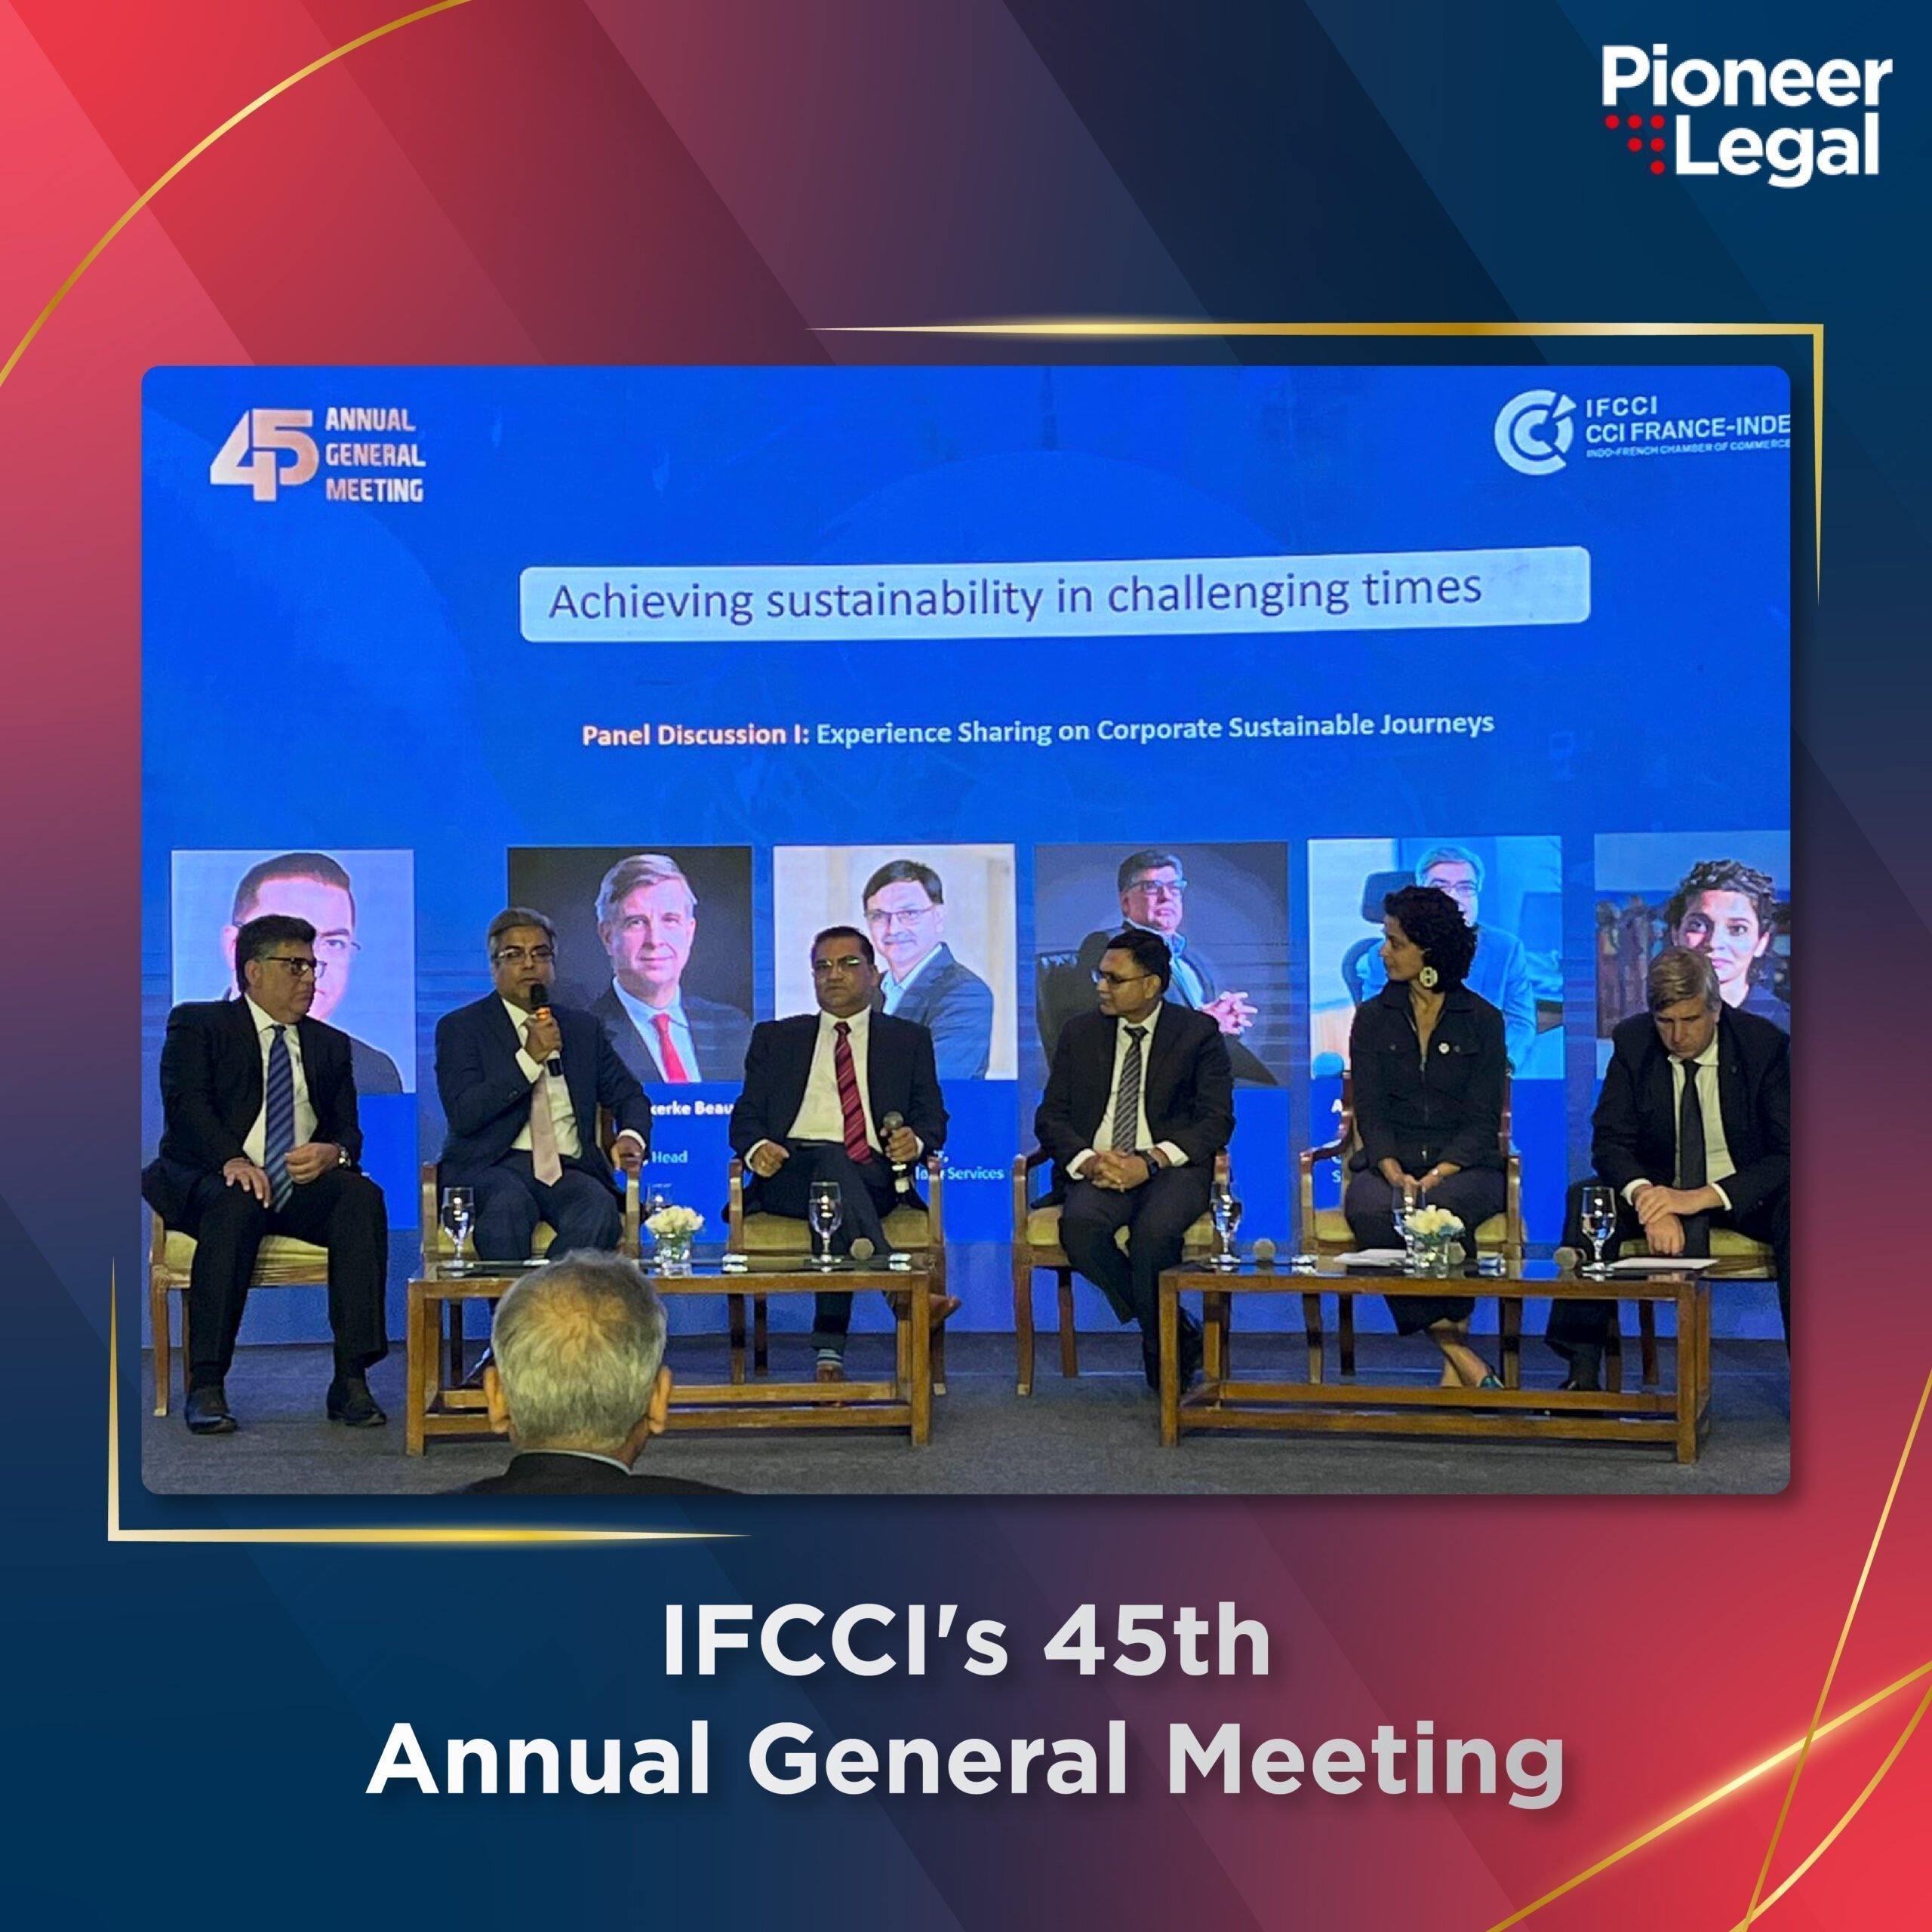 Pioneer Legal - On September 15th, Indo-French Chamber of Commerce & Industry (IFCCI) held its 45th Annual General Meeting.